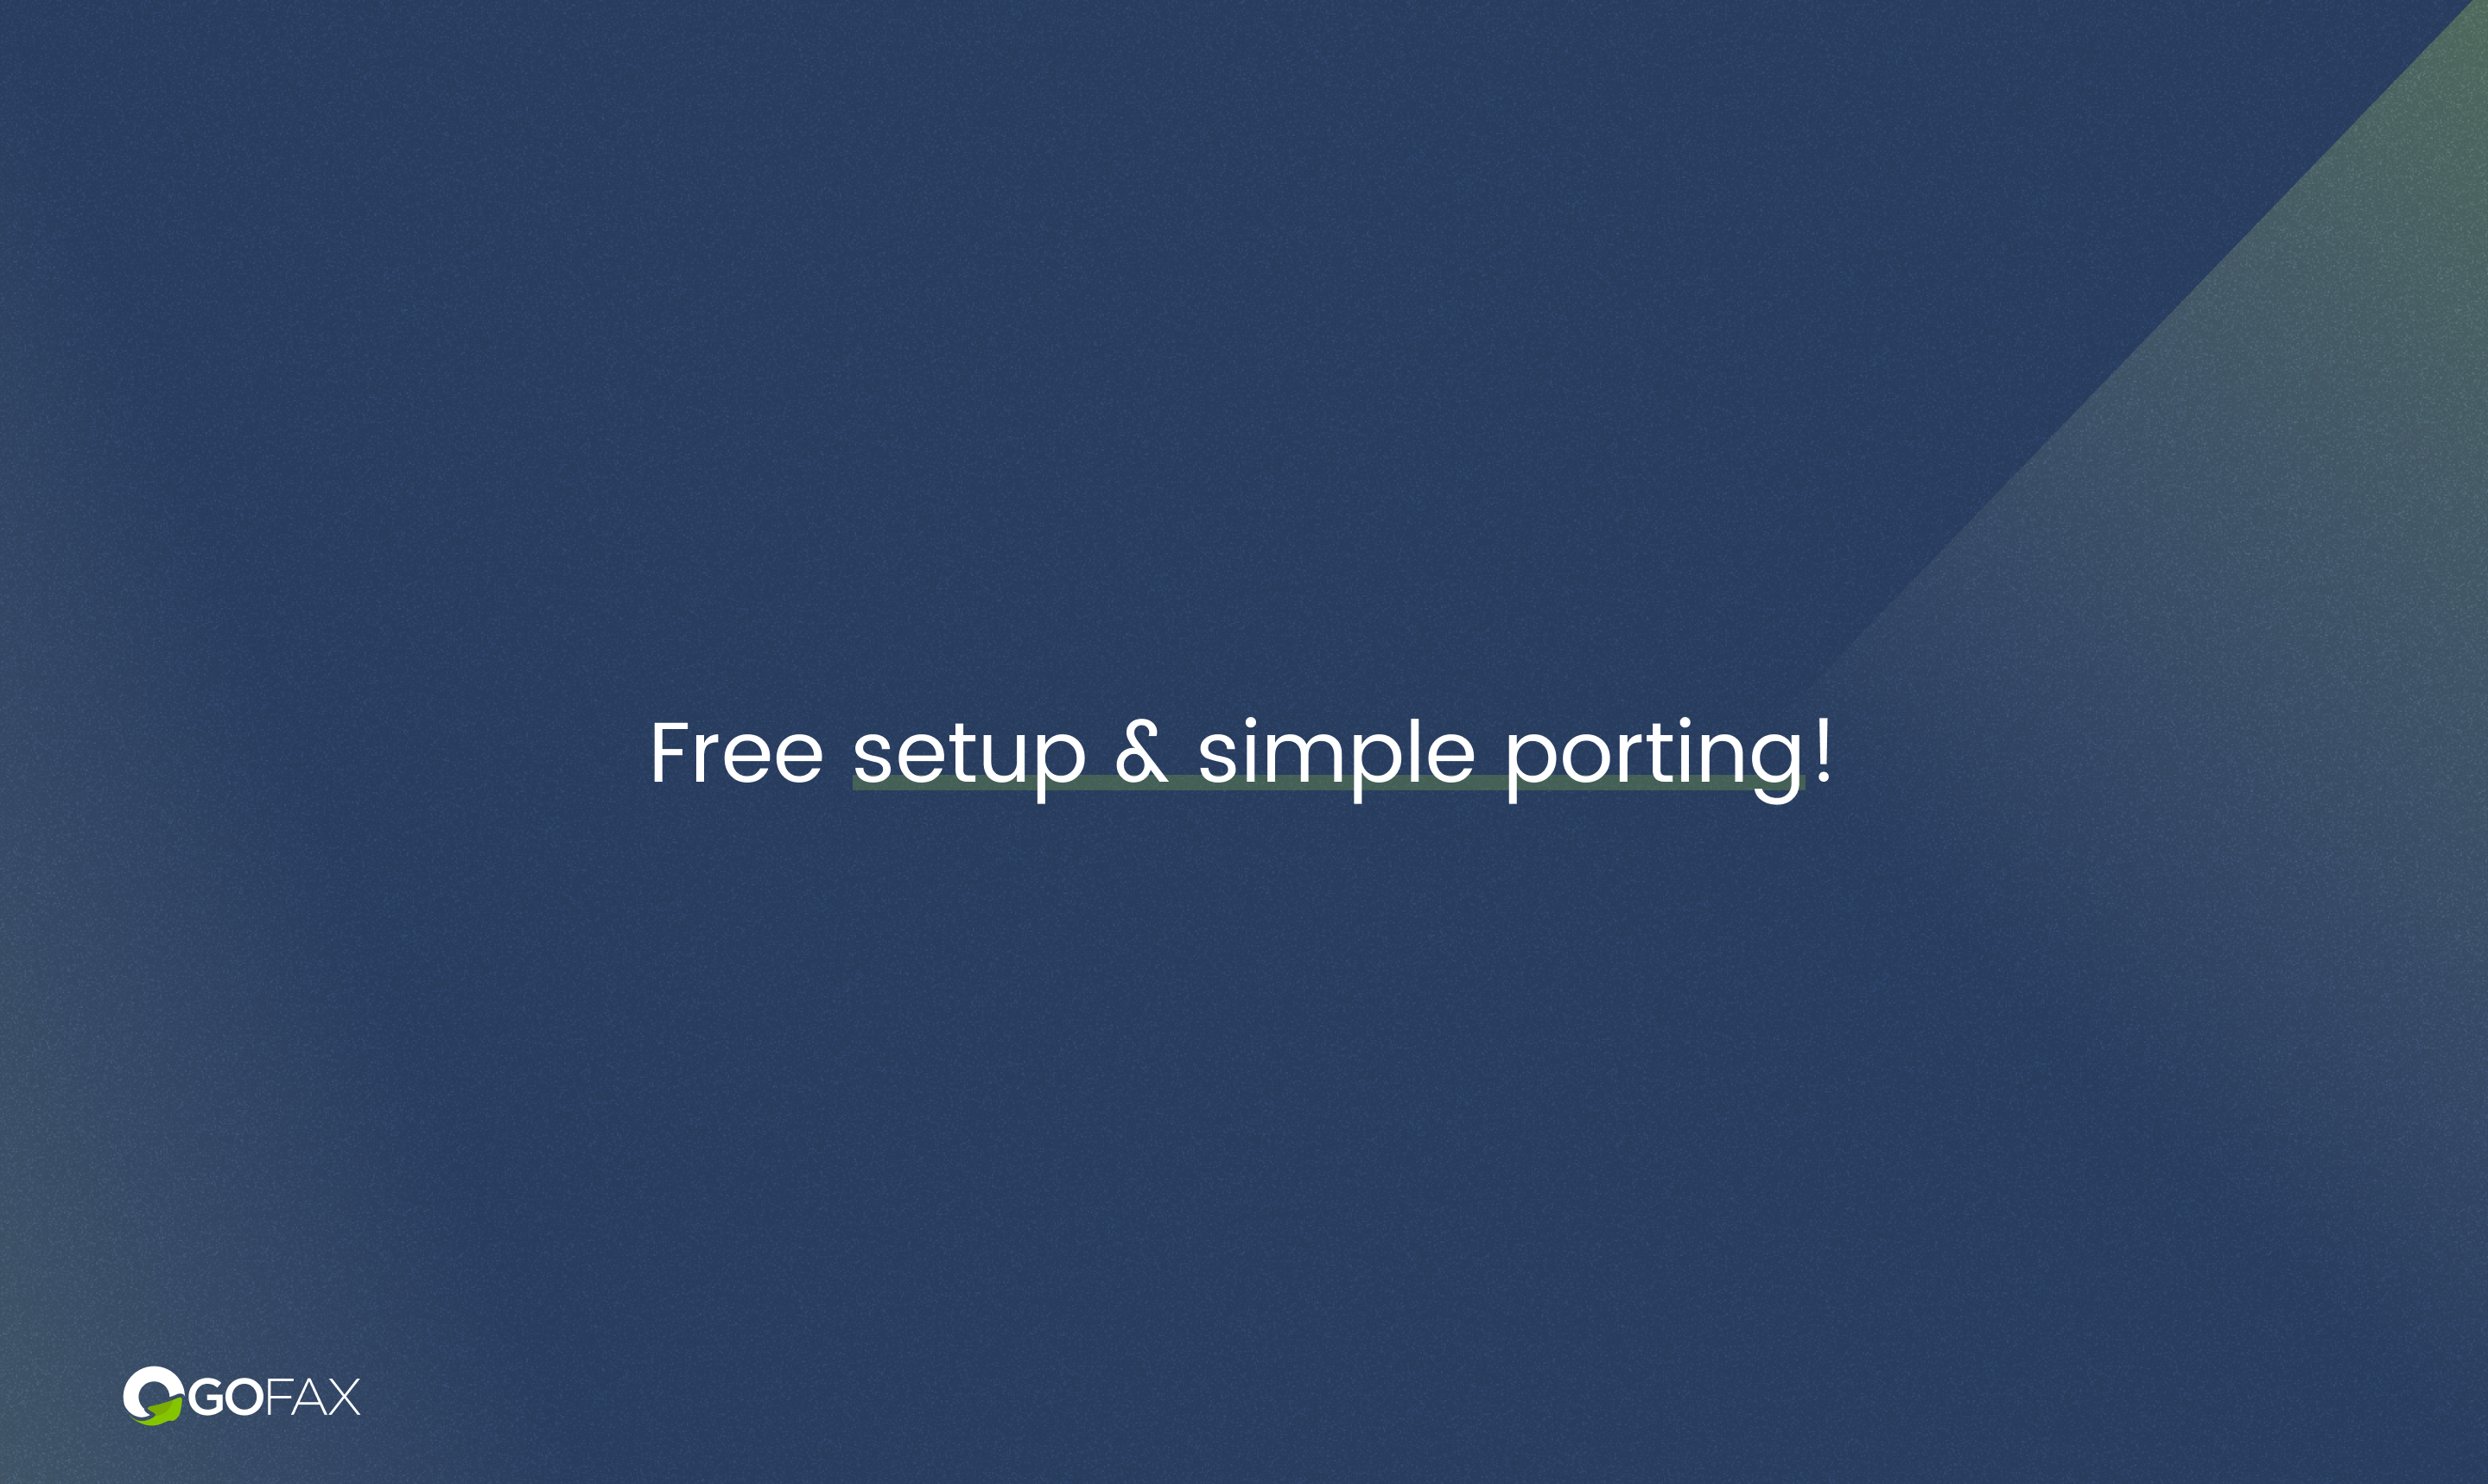 free-setup-simple-porting-make-the-switch-to-gofax